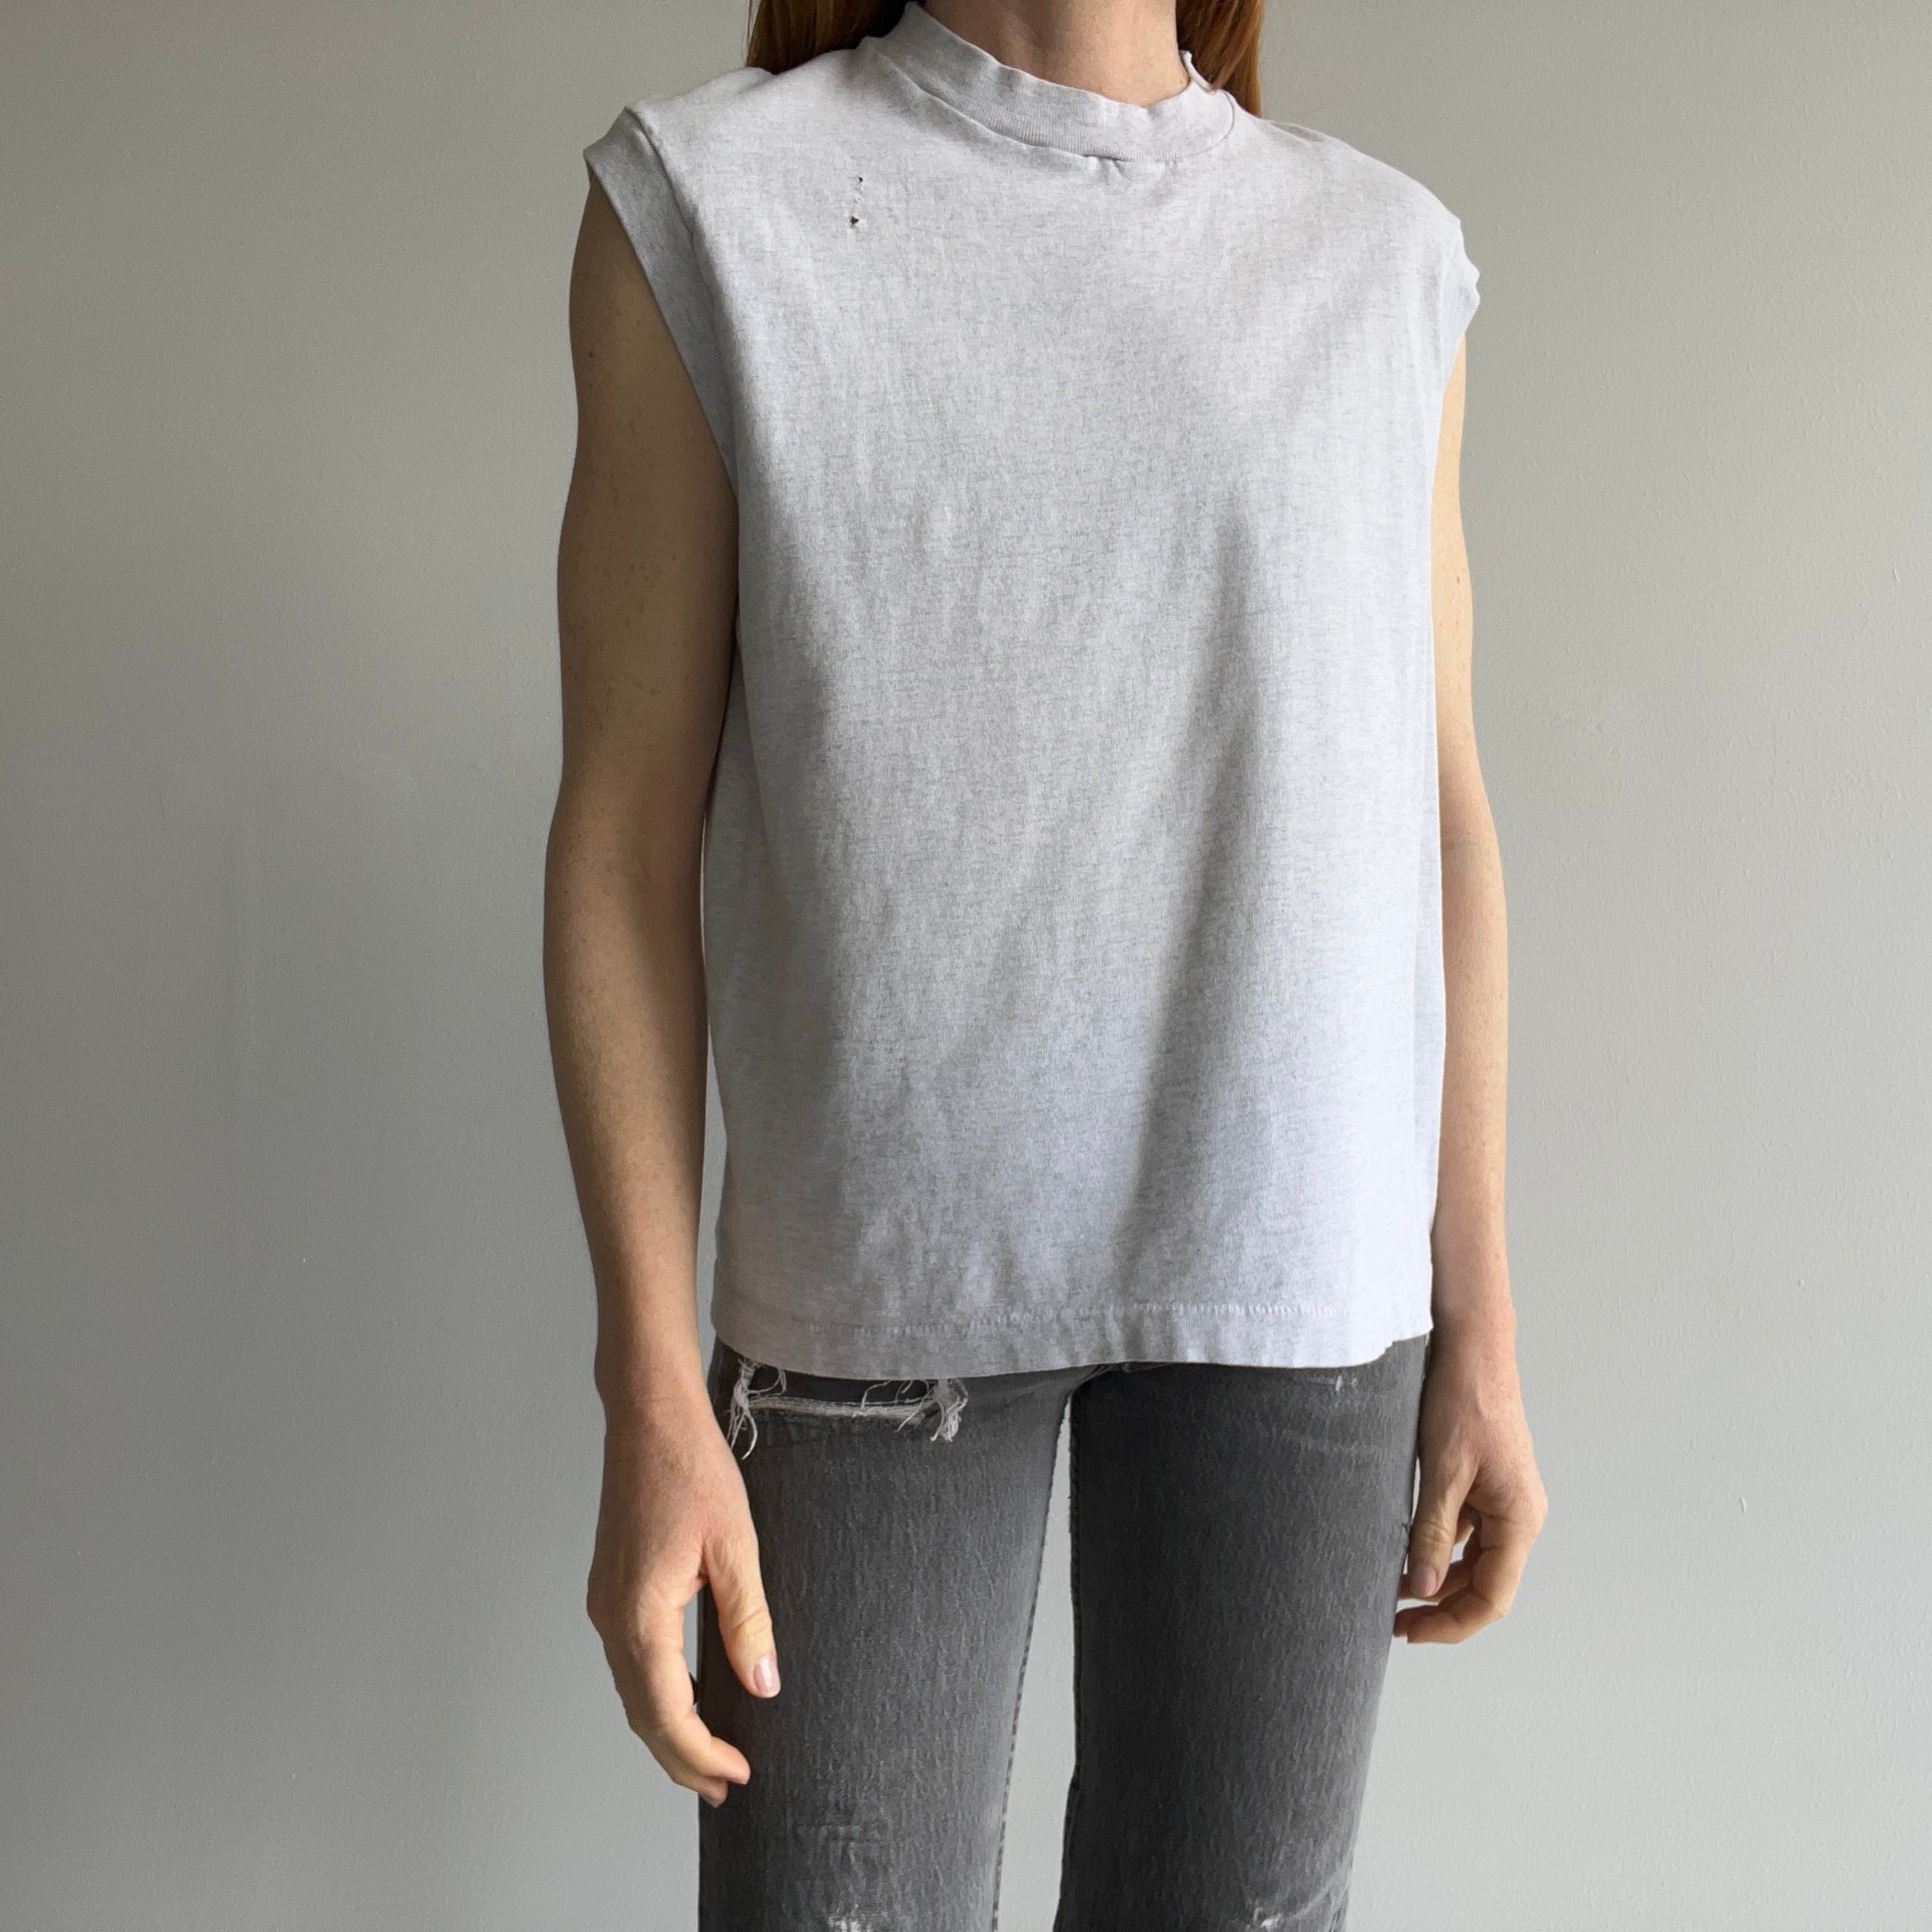 1980s Soft and Worn Light Gray Cotton Muscle Tank by FOTL